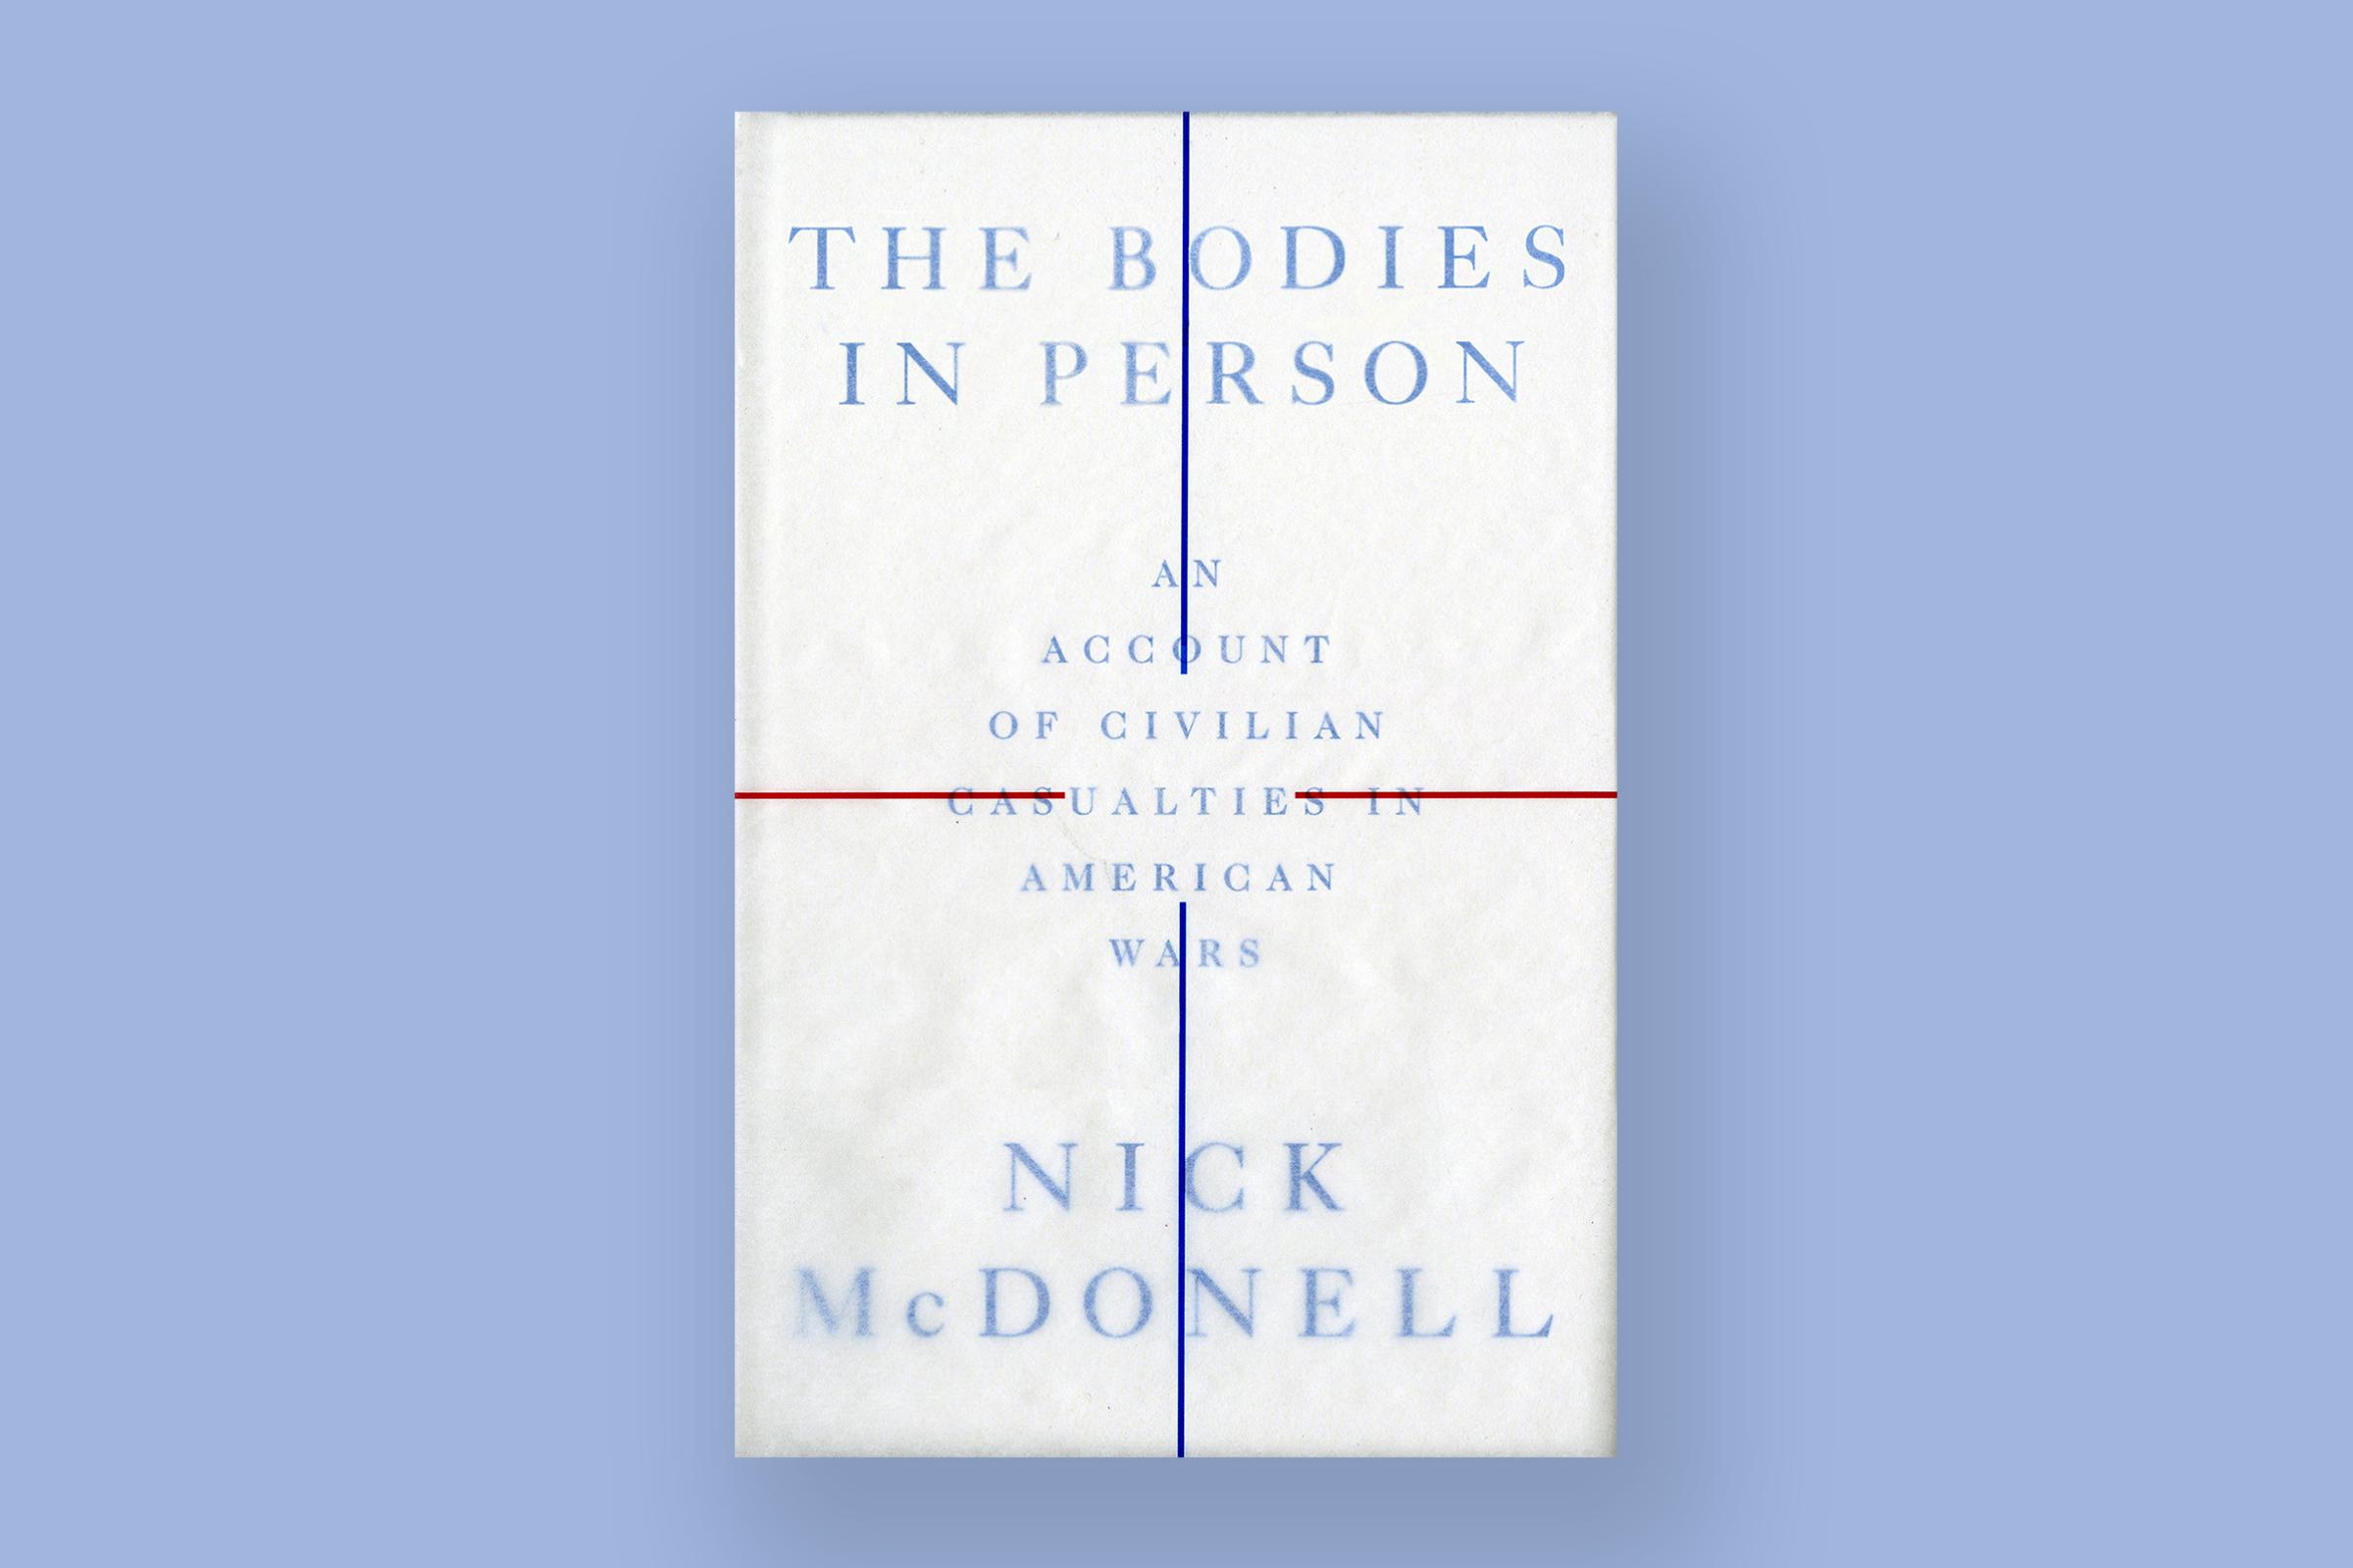 Nick-McDonell-The-Bodies-in-Person-Book